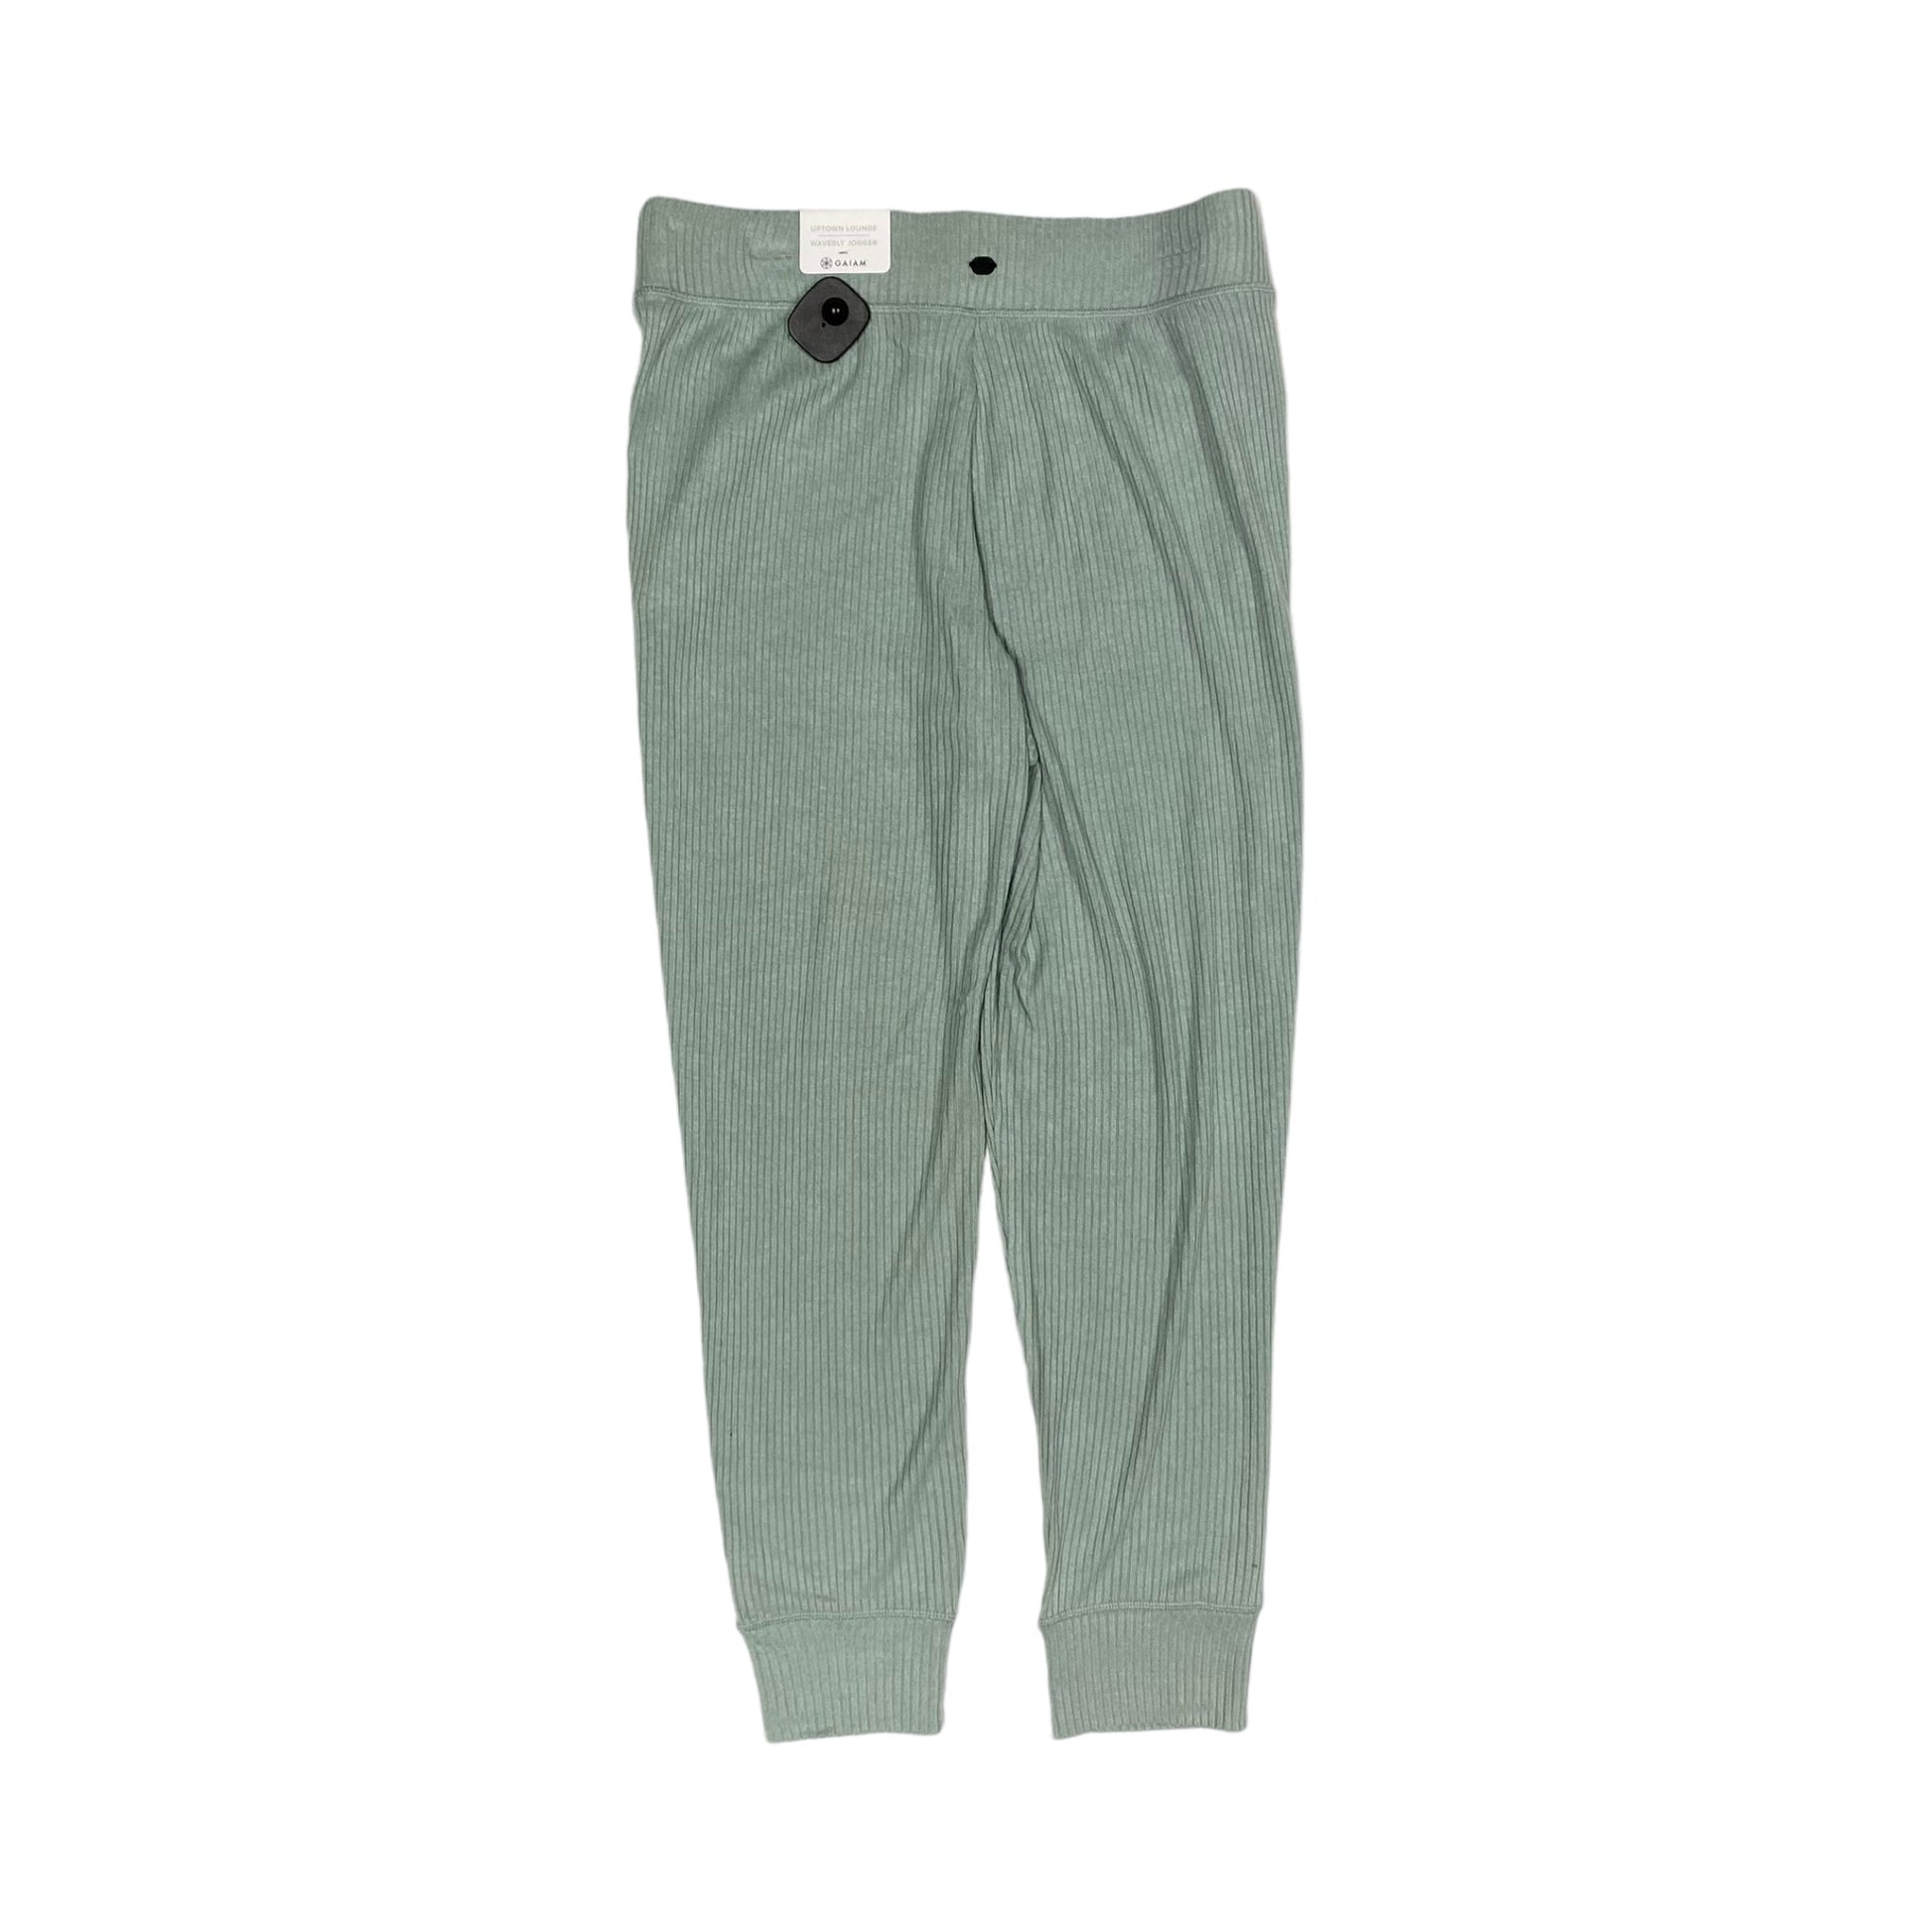 Pants Lounge By Gaiam Size: M